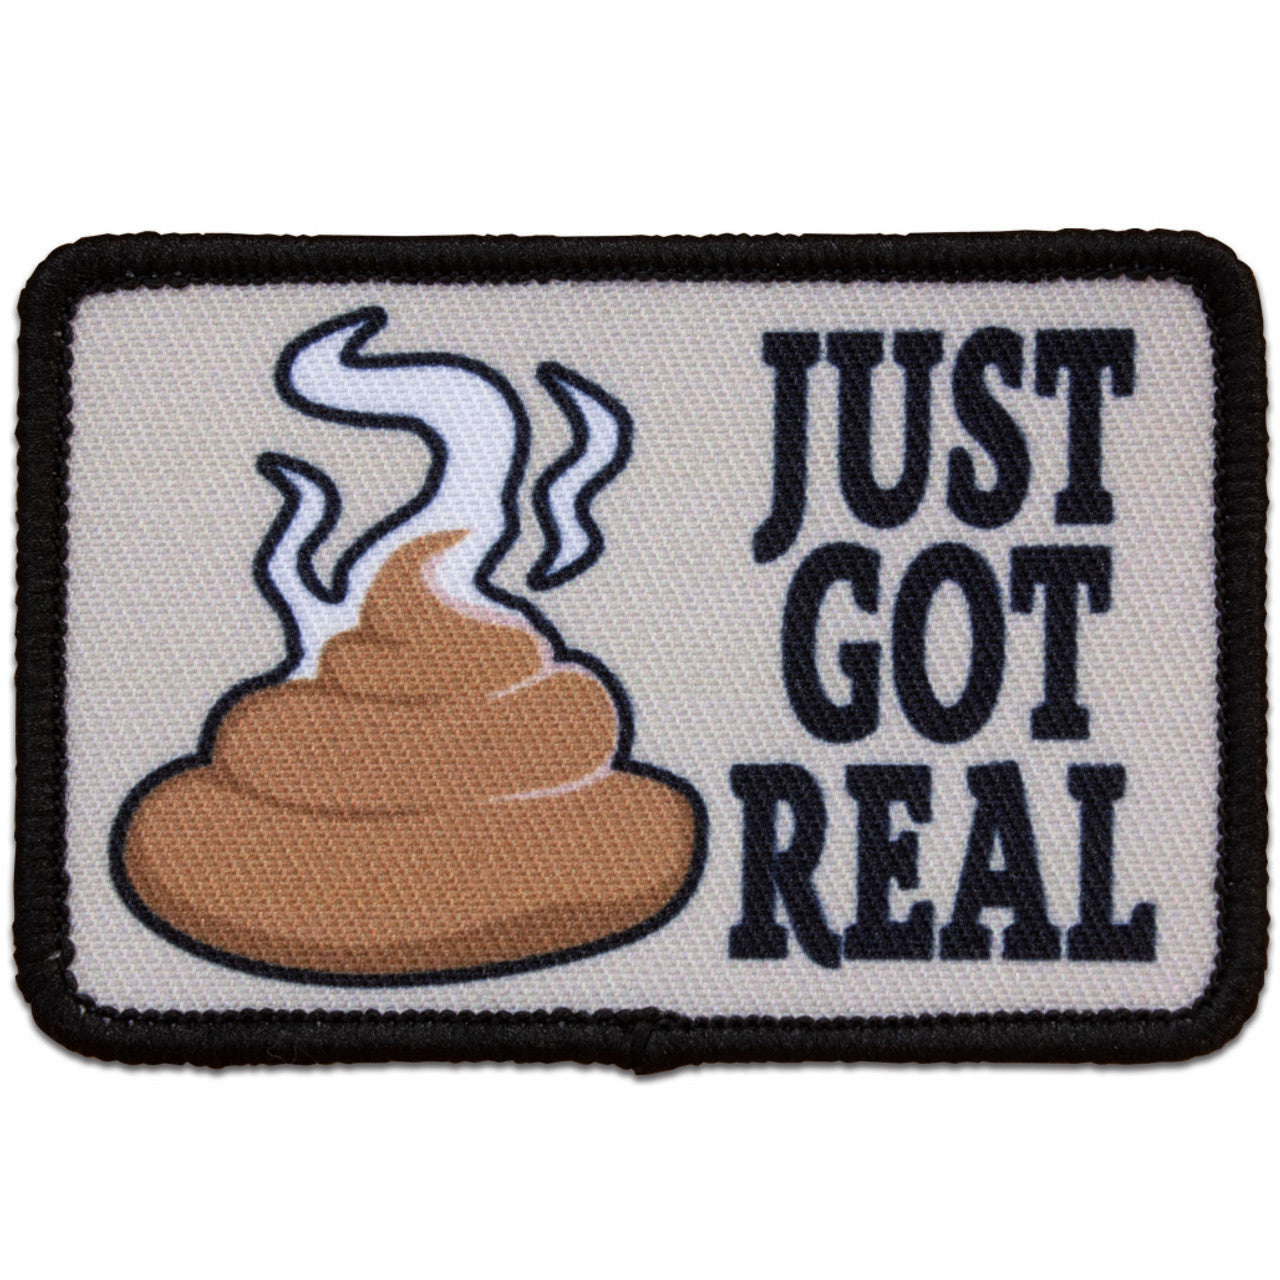 "SHIT JUST GOT REAL" MORALE PATCH